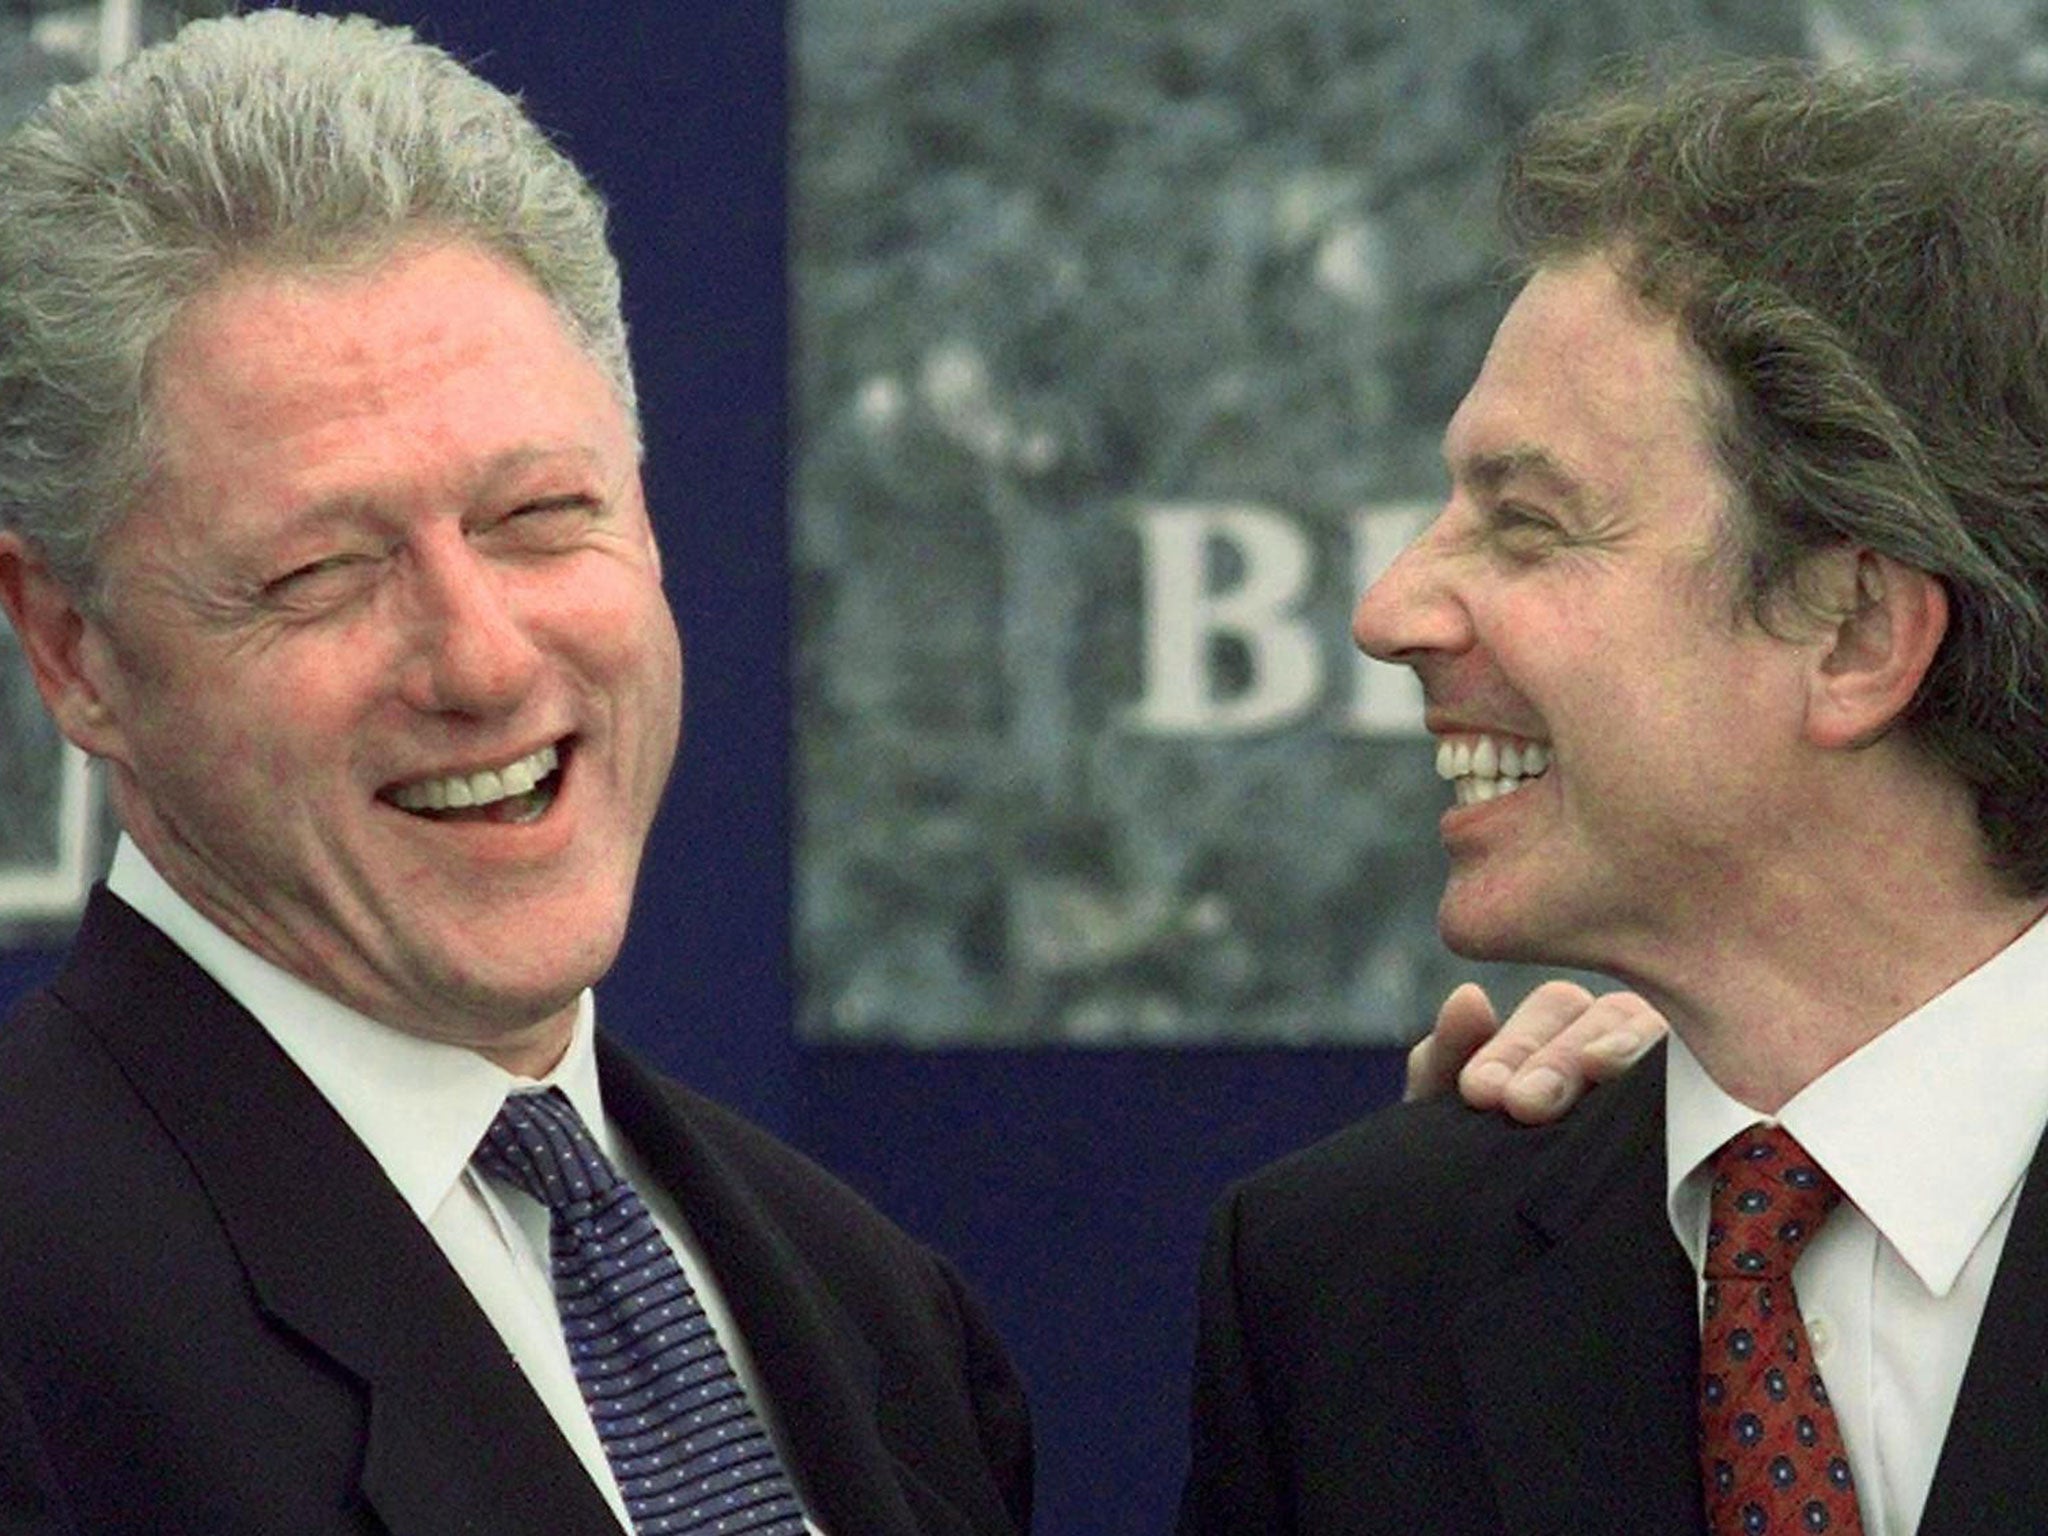 US President Bill Clinton with Prime Minister Tony Blair in Belfast, Northern Ireland, in September 1998